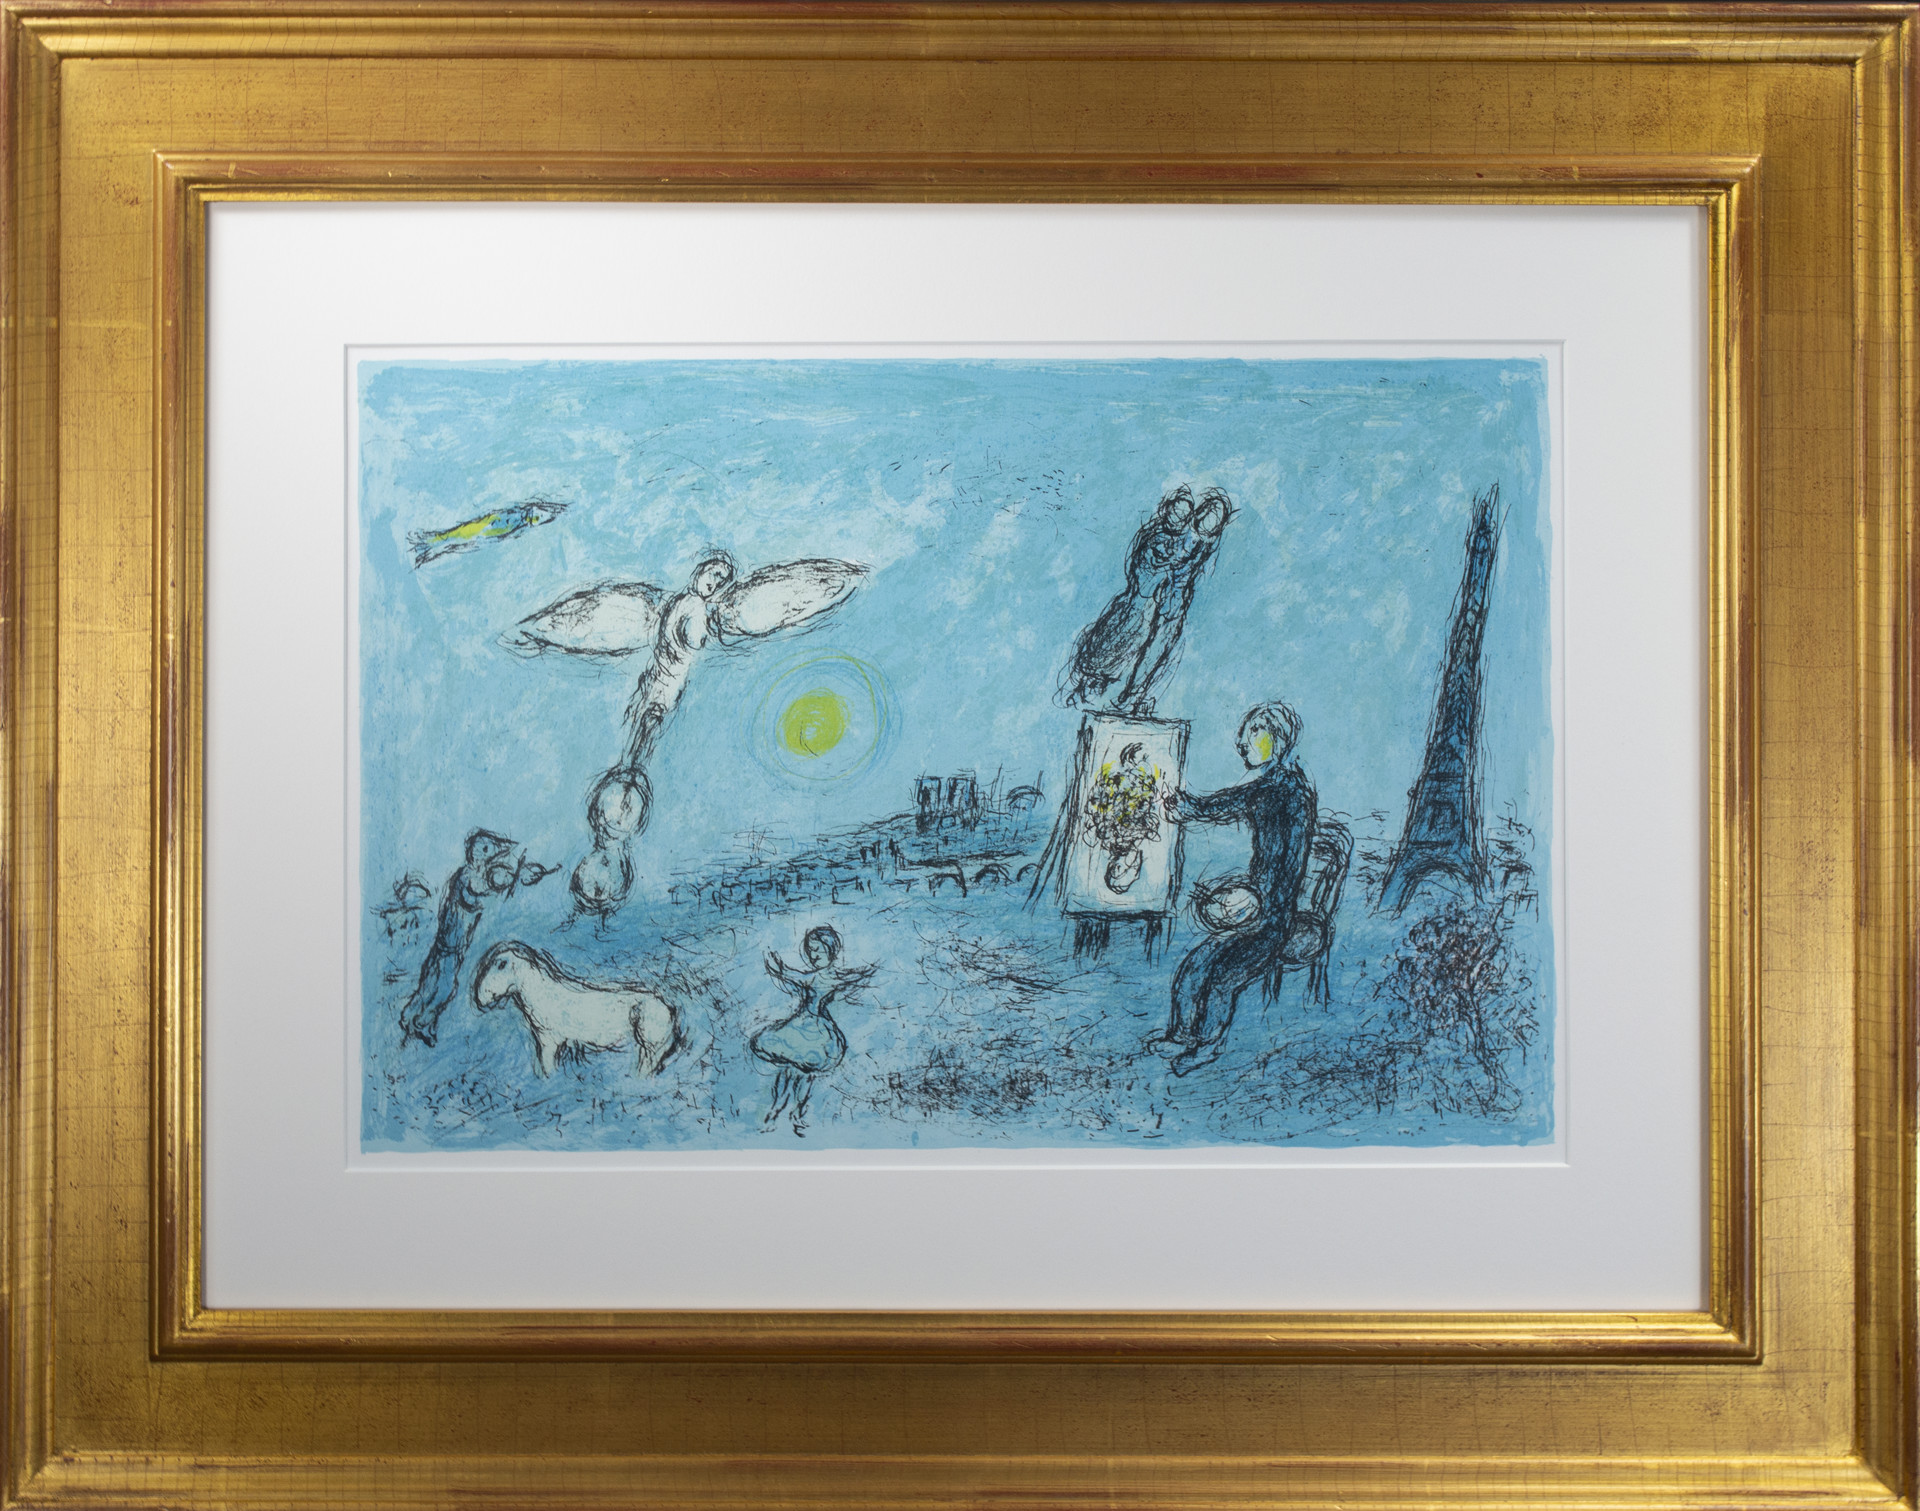 Le Peintre et son Double (The Painter and his Double) by Marc Chagall